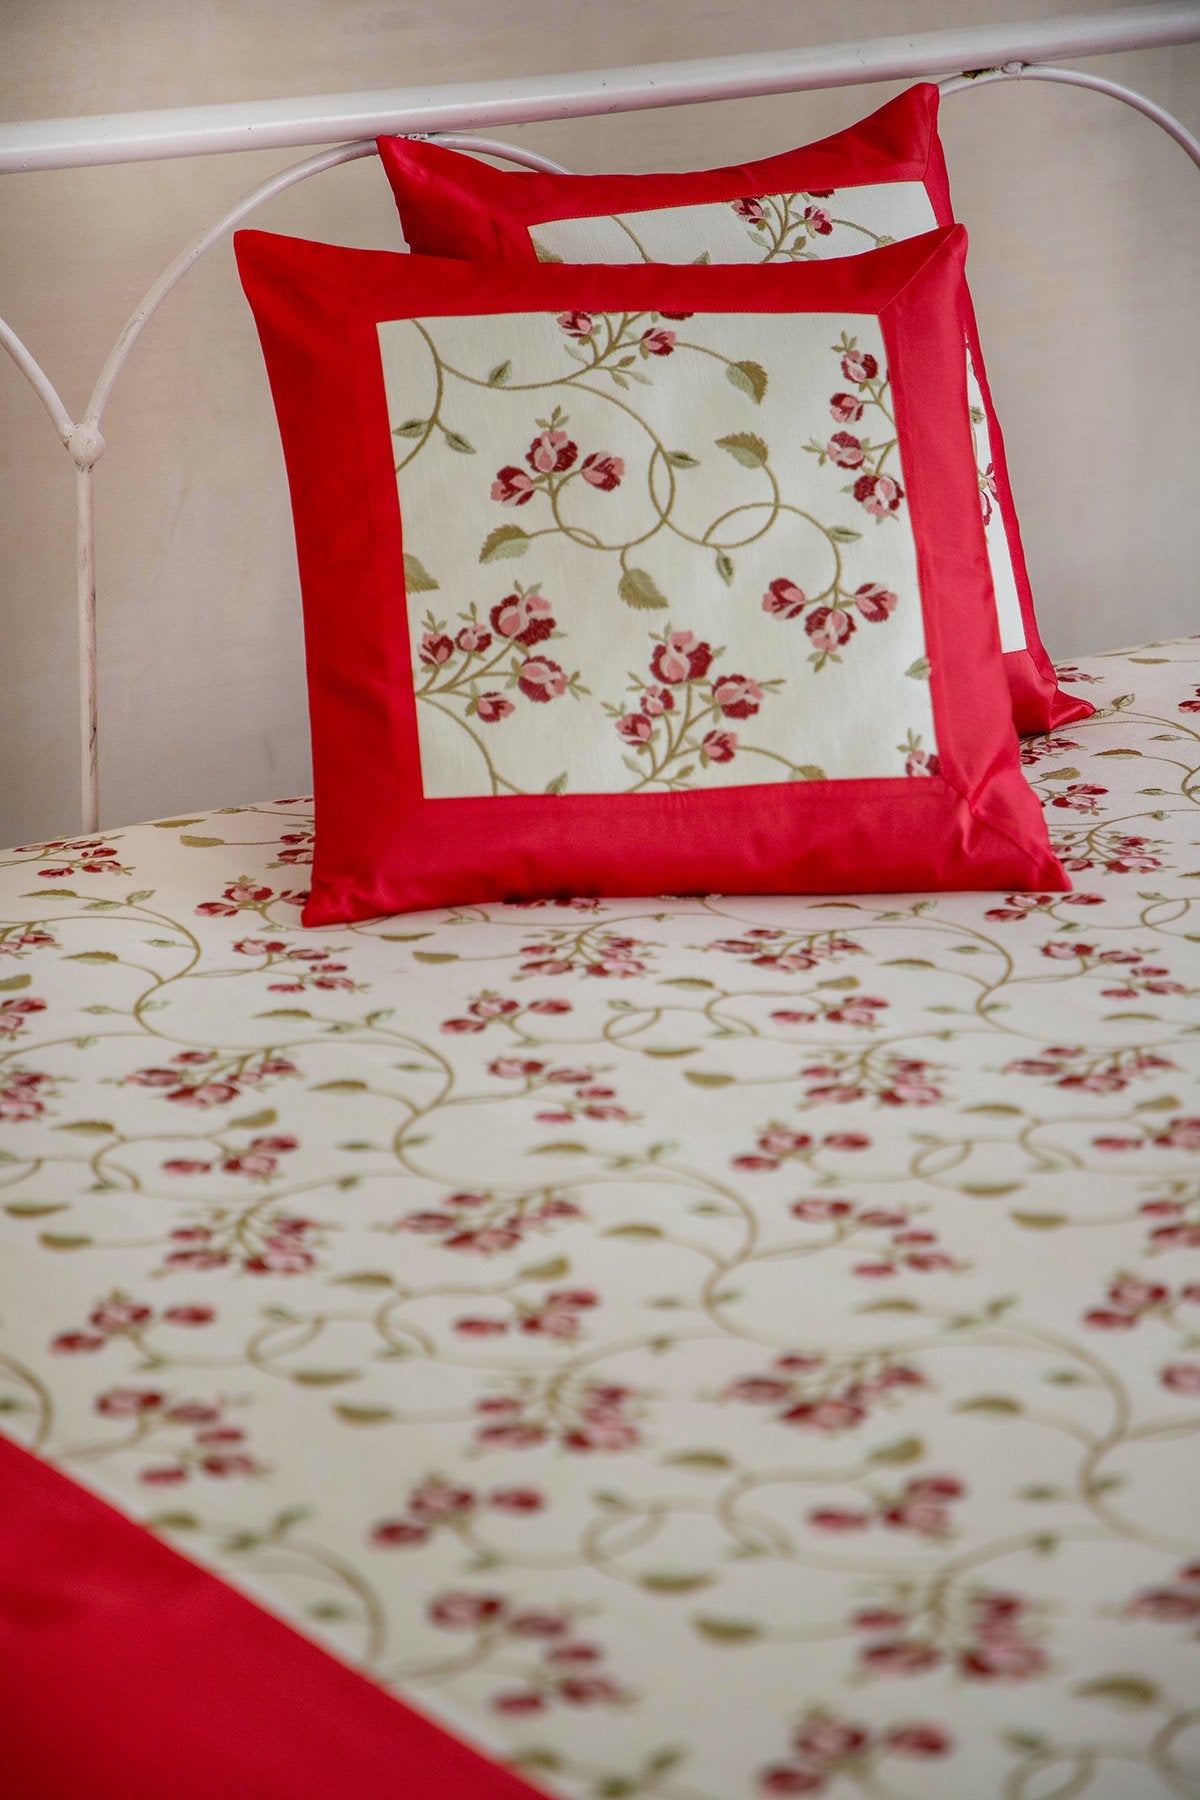 Red Rose Cotton Bedcover